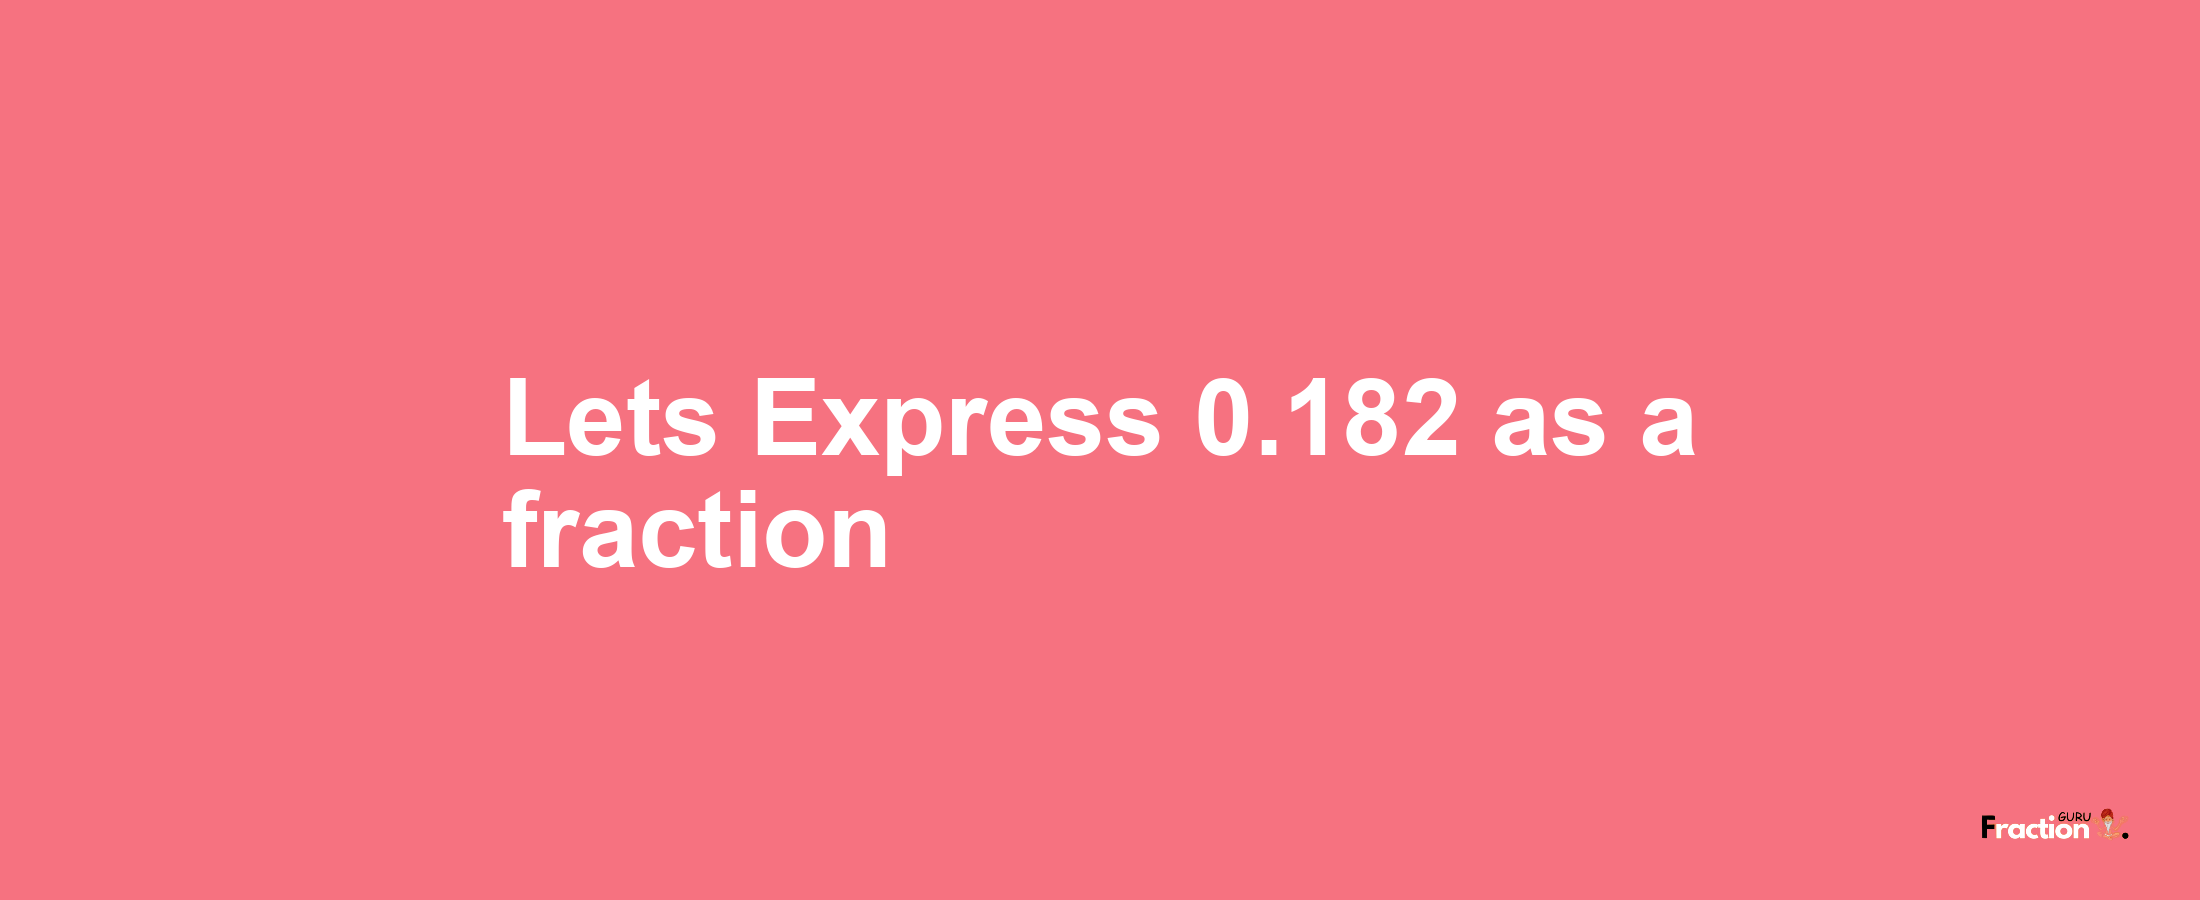 Lets Express 0.182 as afraction